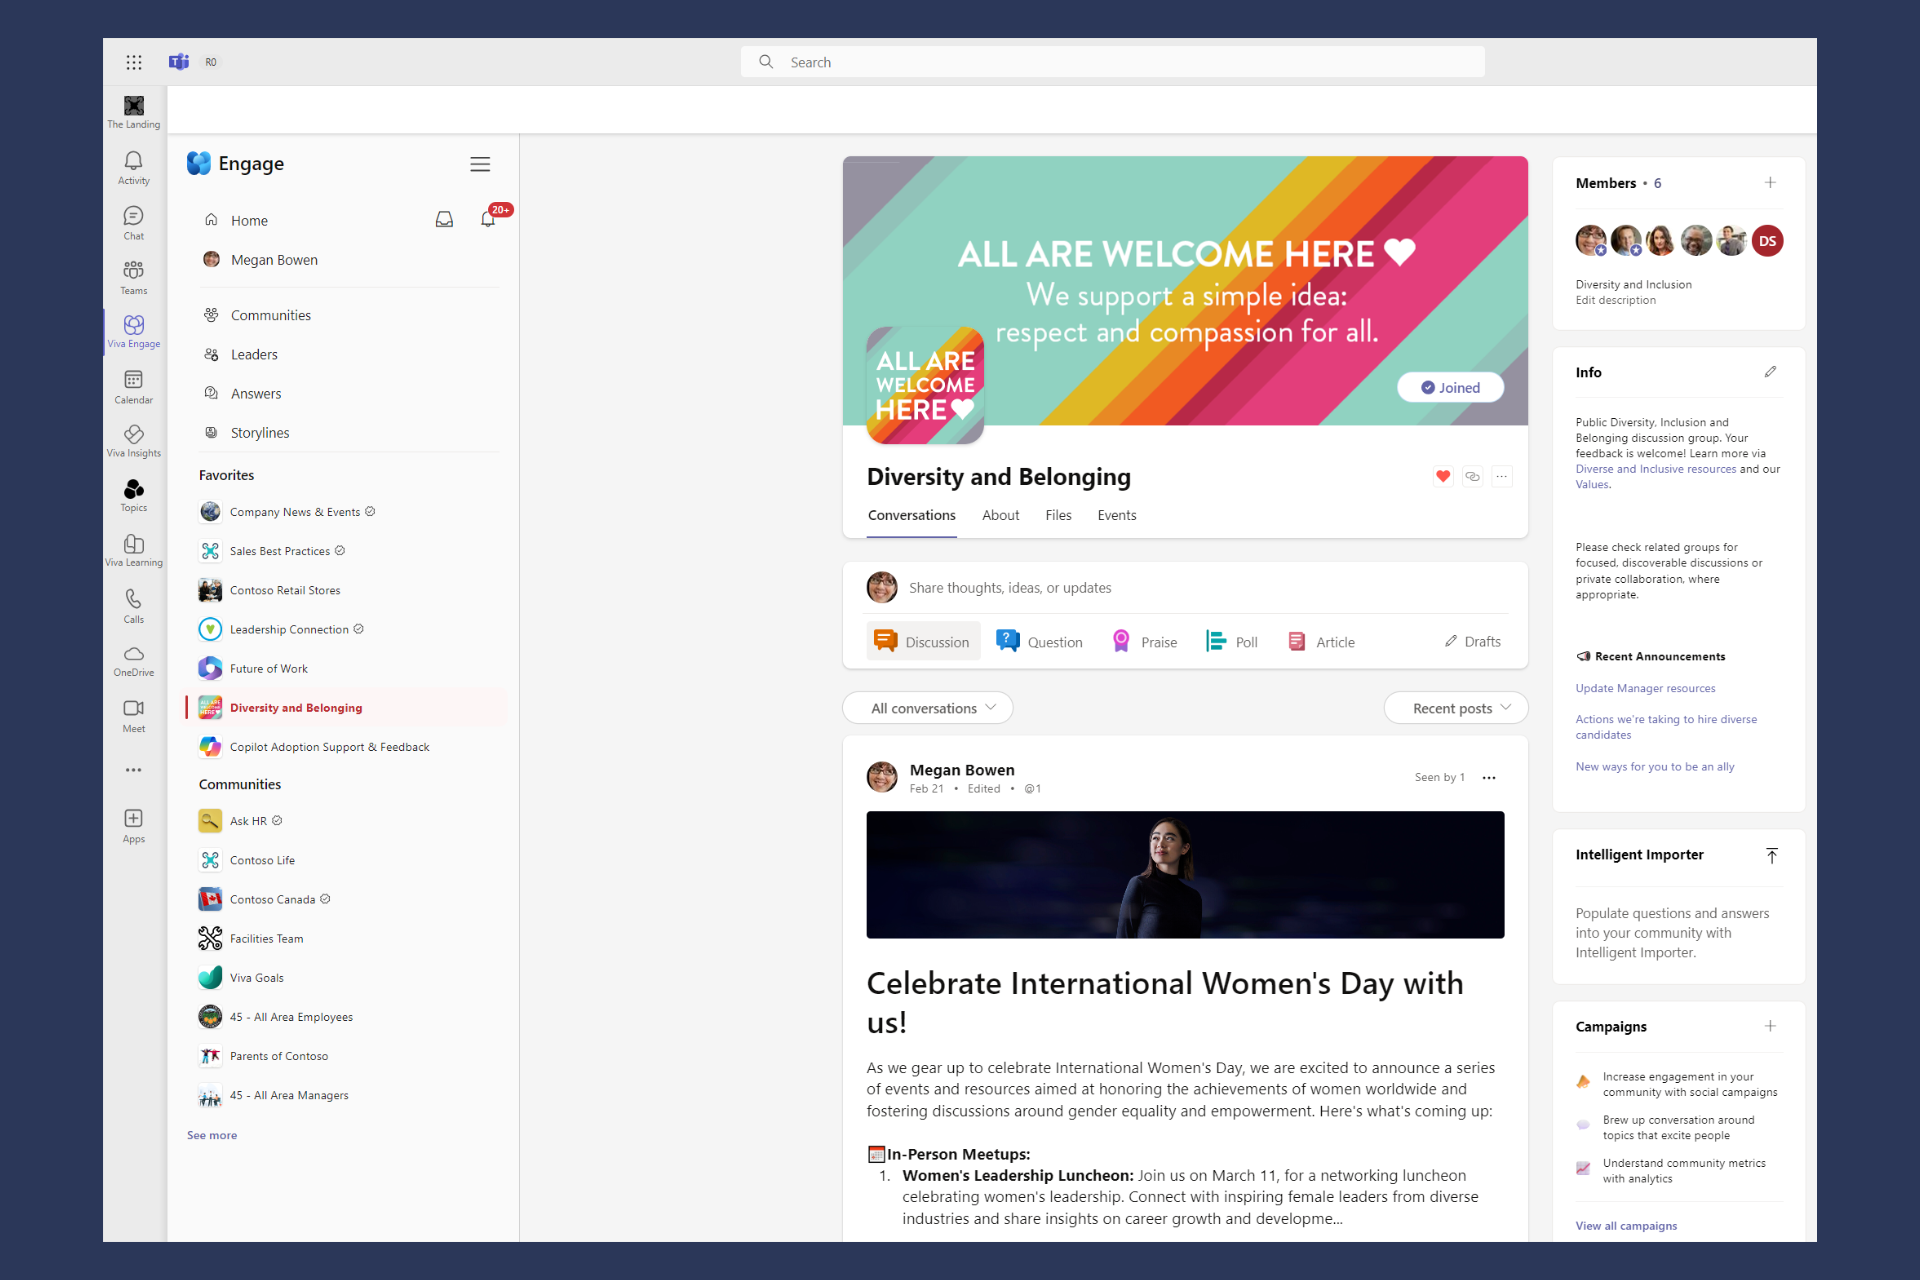 Viva Engage has a new tool called Articles